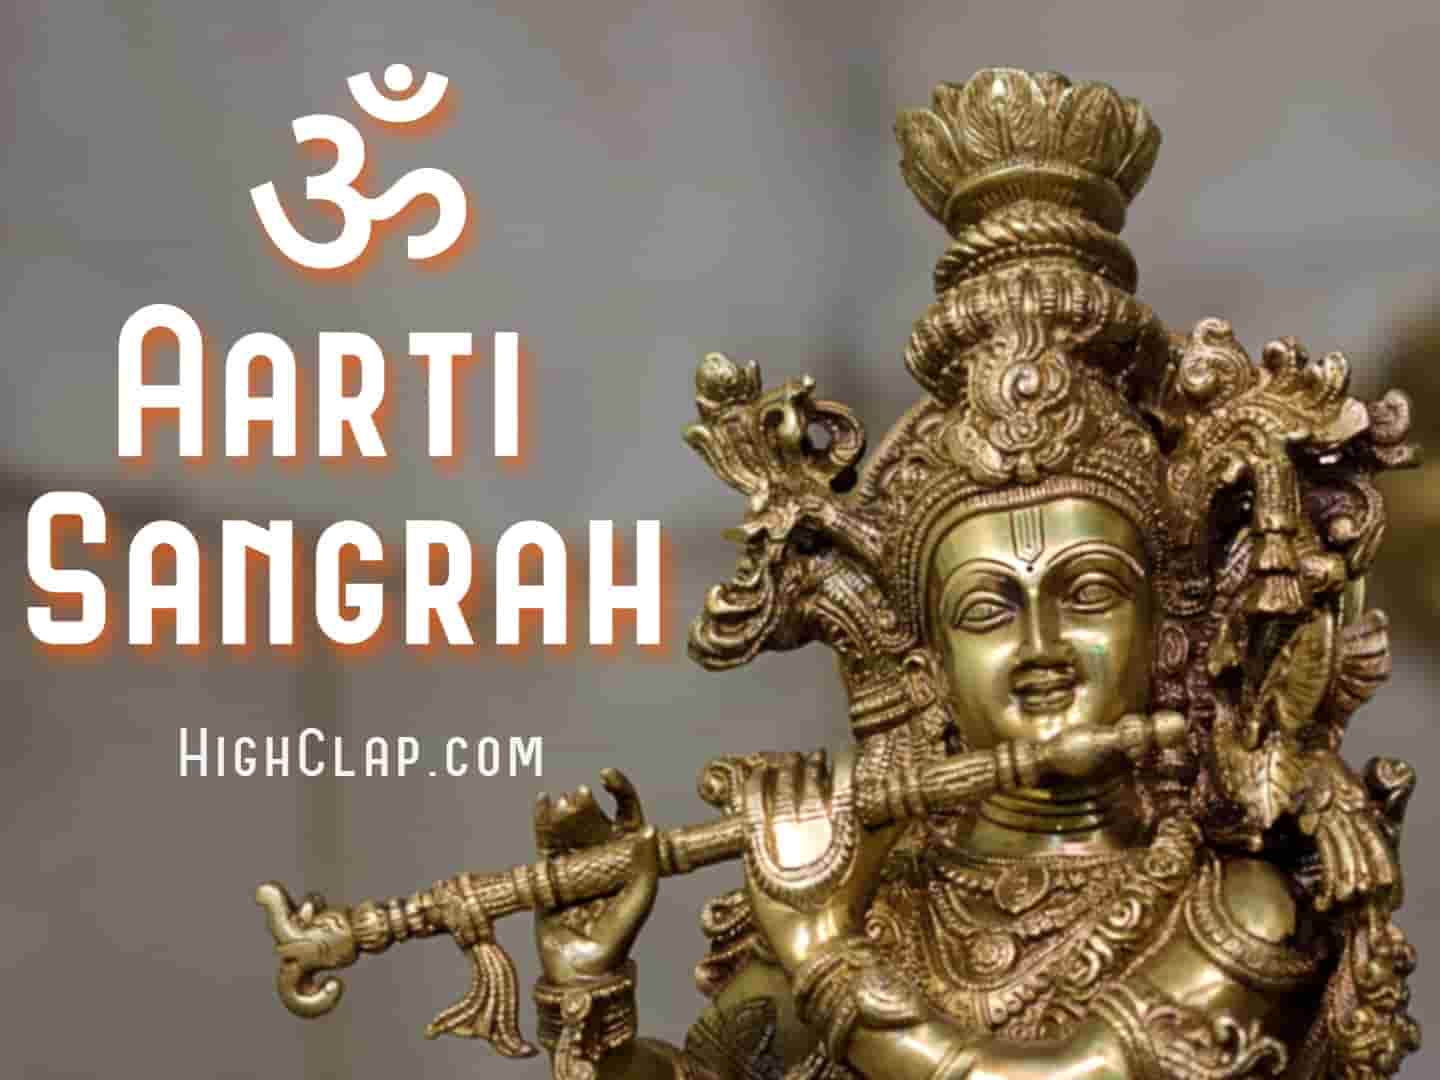 Aarti Sangrah (आरती संग्रह) In Hindi And English